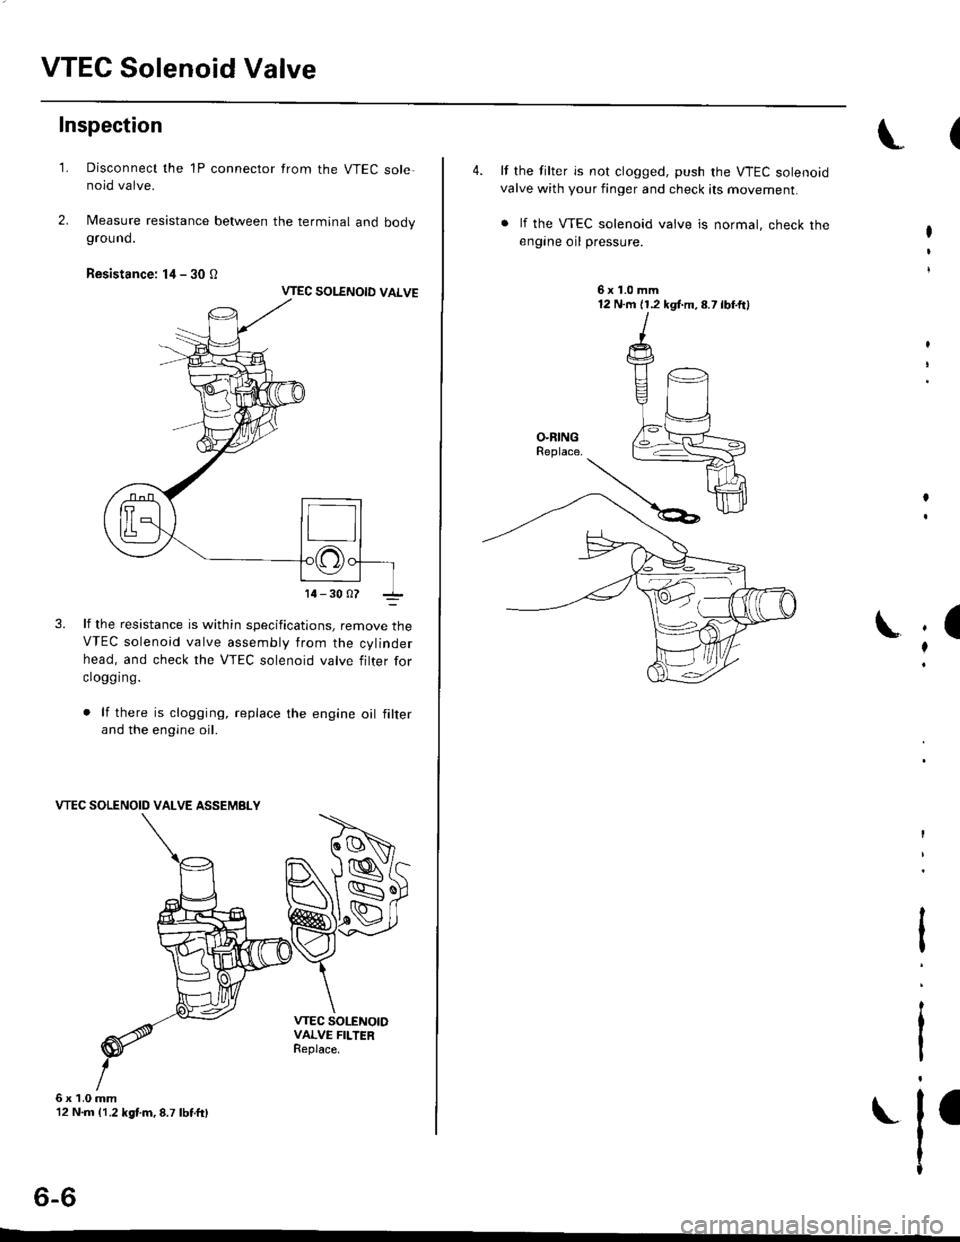 HONDA CIVIC 1998 6.G Owners Manual VTEC Solenoid Valve
Inspection
1.
6x1.0mm12 N.m 11.2 kgf.m,8.7 lbtft)
Disconnect the 1P connector from the VTEC sole-noid valve.
Measure resistance between the terminal and bodyground.
Resistance: l4 